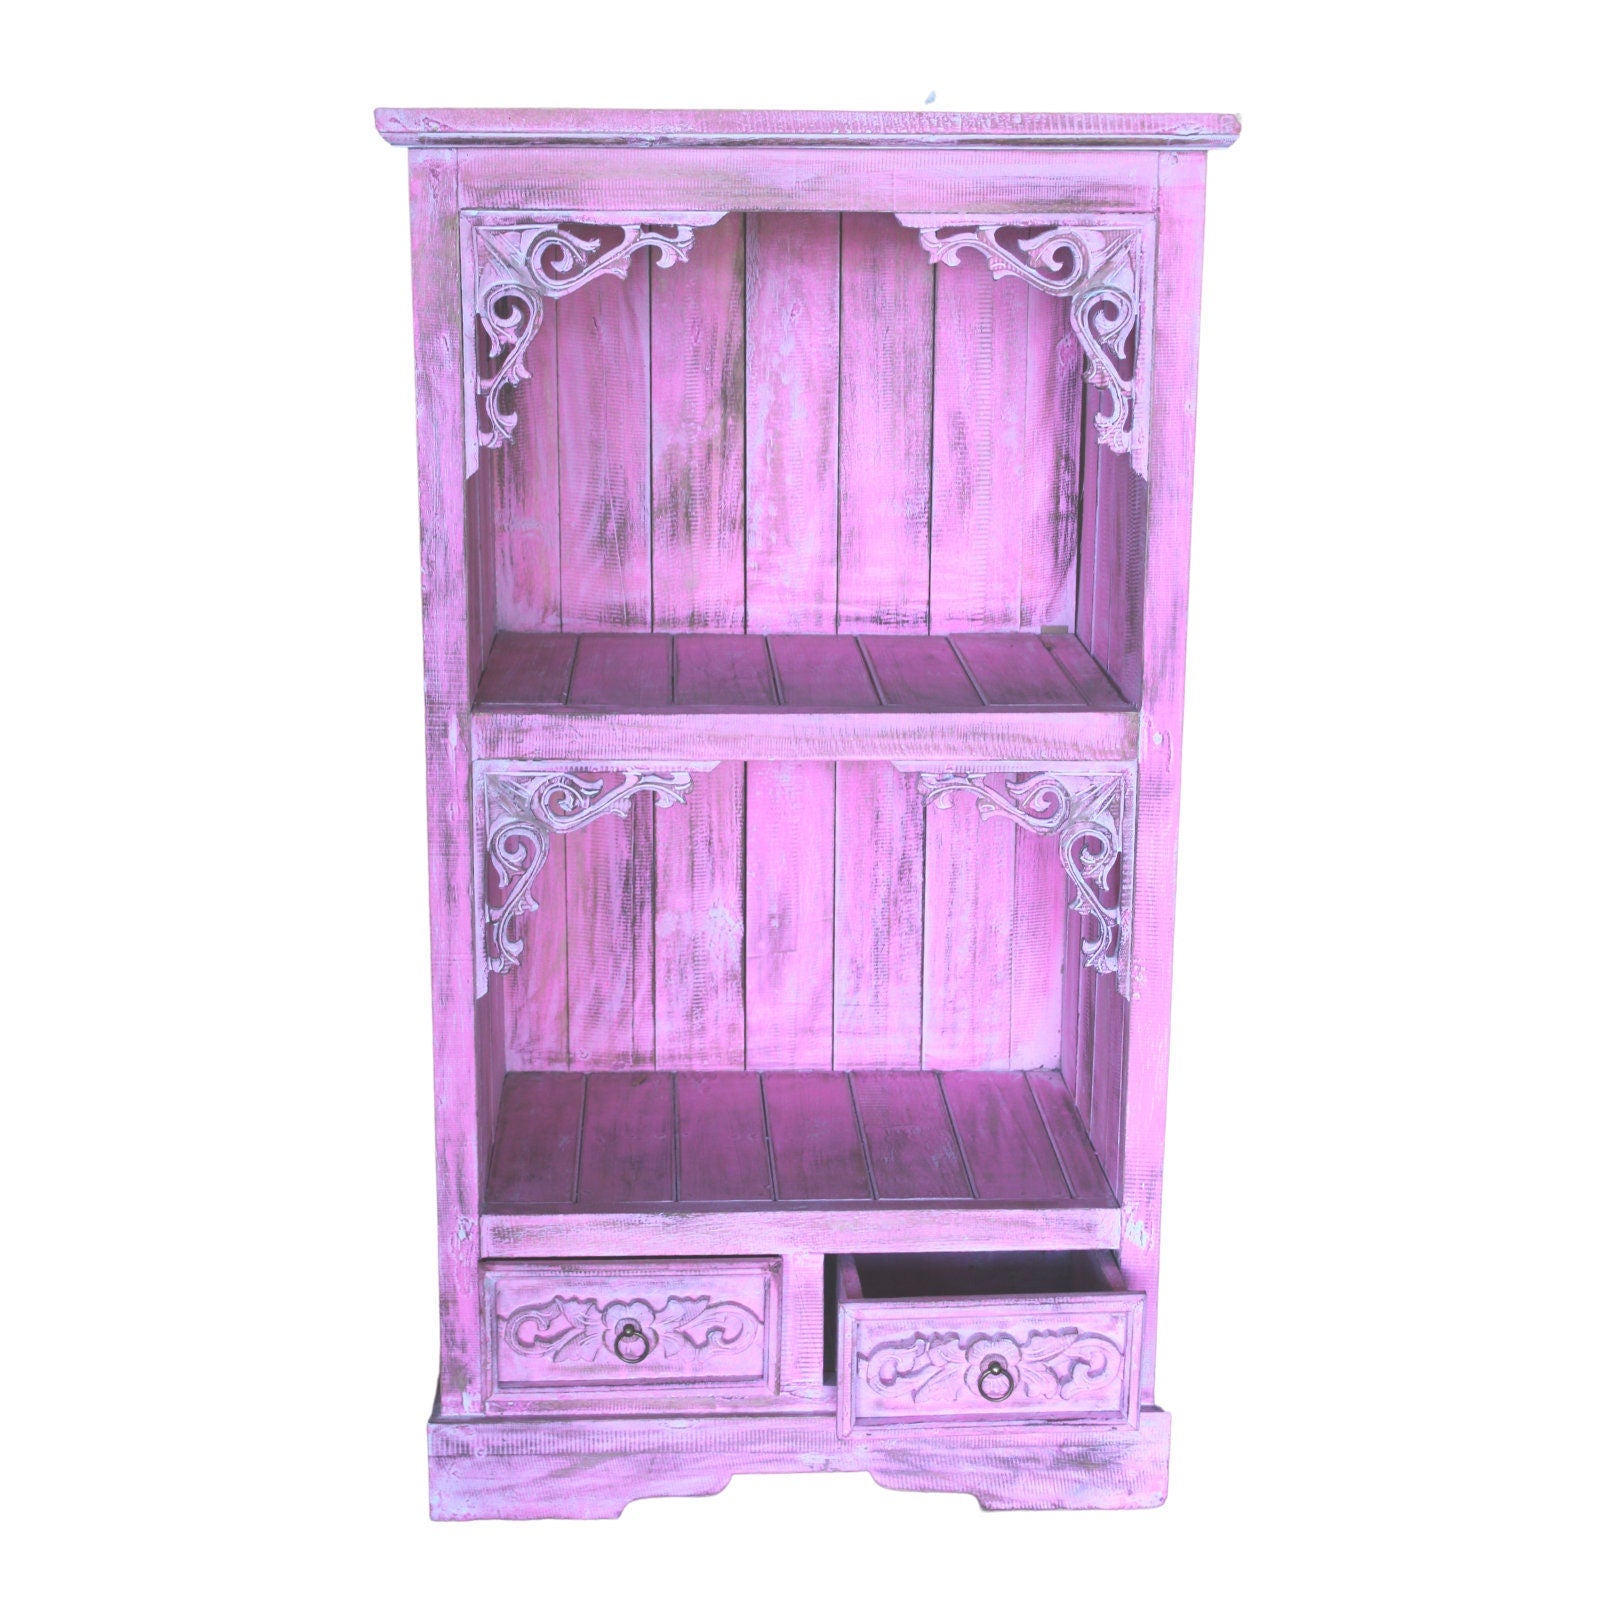 Albasia Bathroom Cabinets-pink-washed hand carved, exquisite detailing-oerfect for any room-Dimensions: H - 120cm; W - 66.7cm; D - 40cm. Wonkey Donkey Bazaar